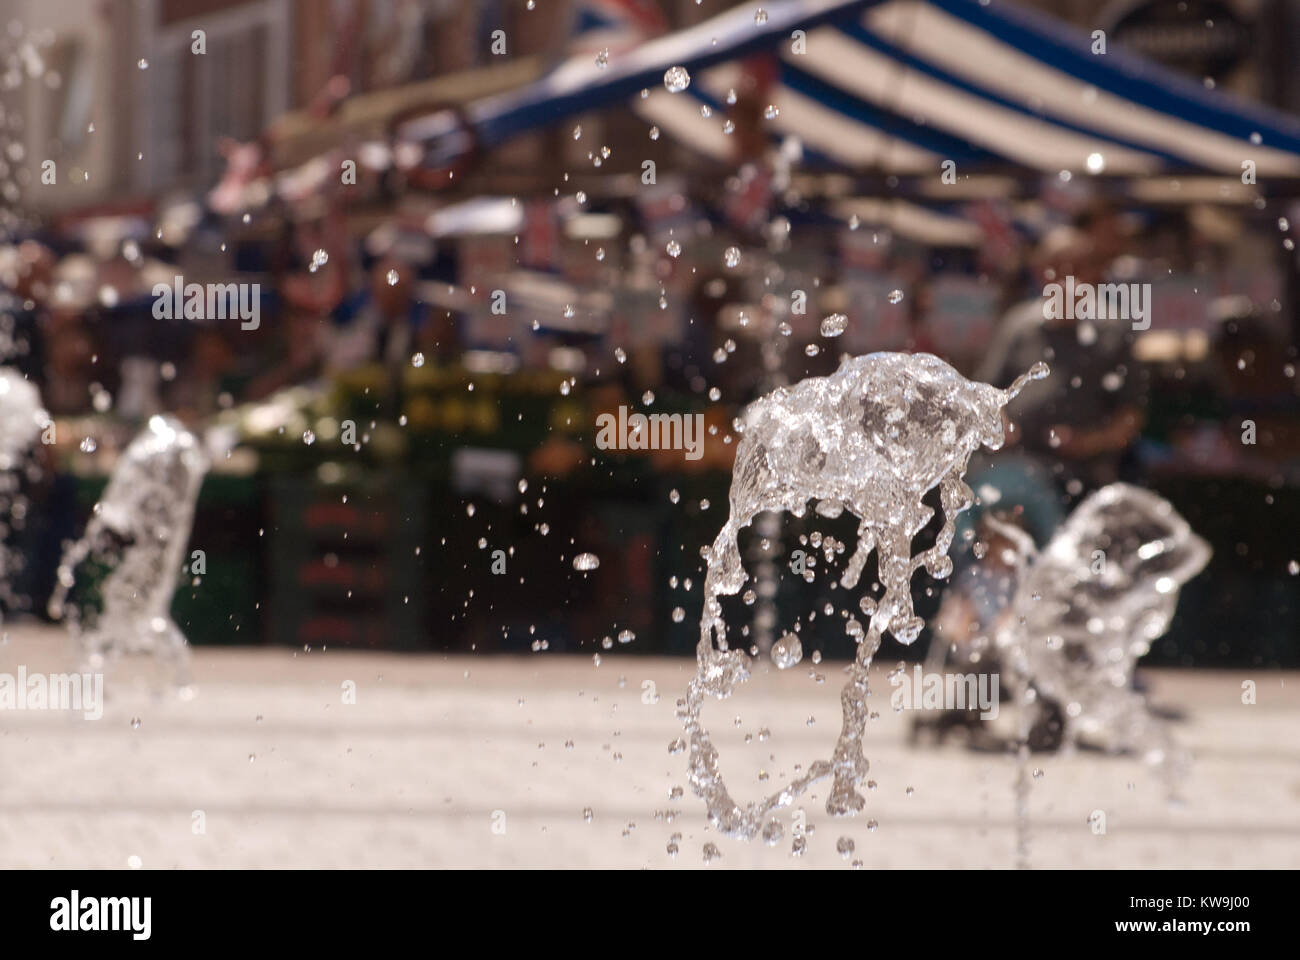 Fountains in outdoor market square, Stockton-on-Tees Stock Photo